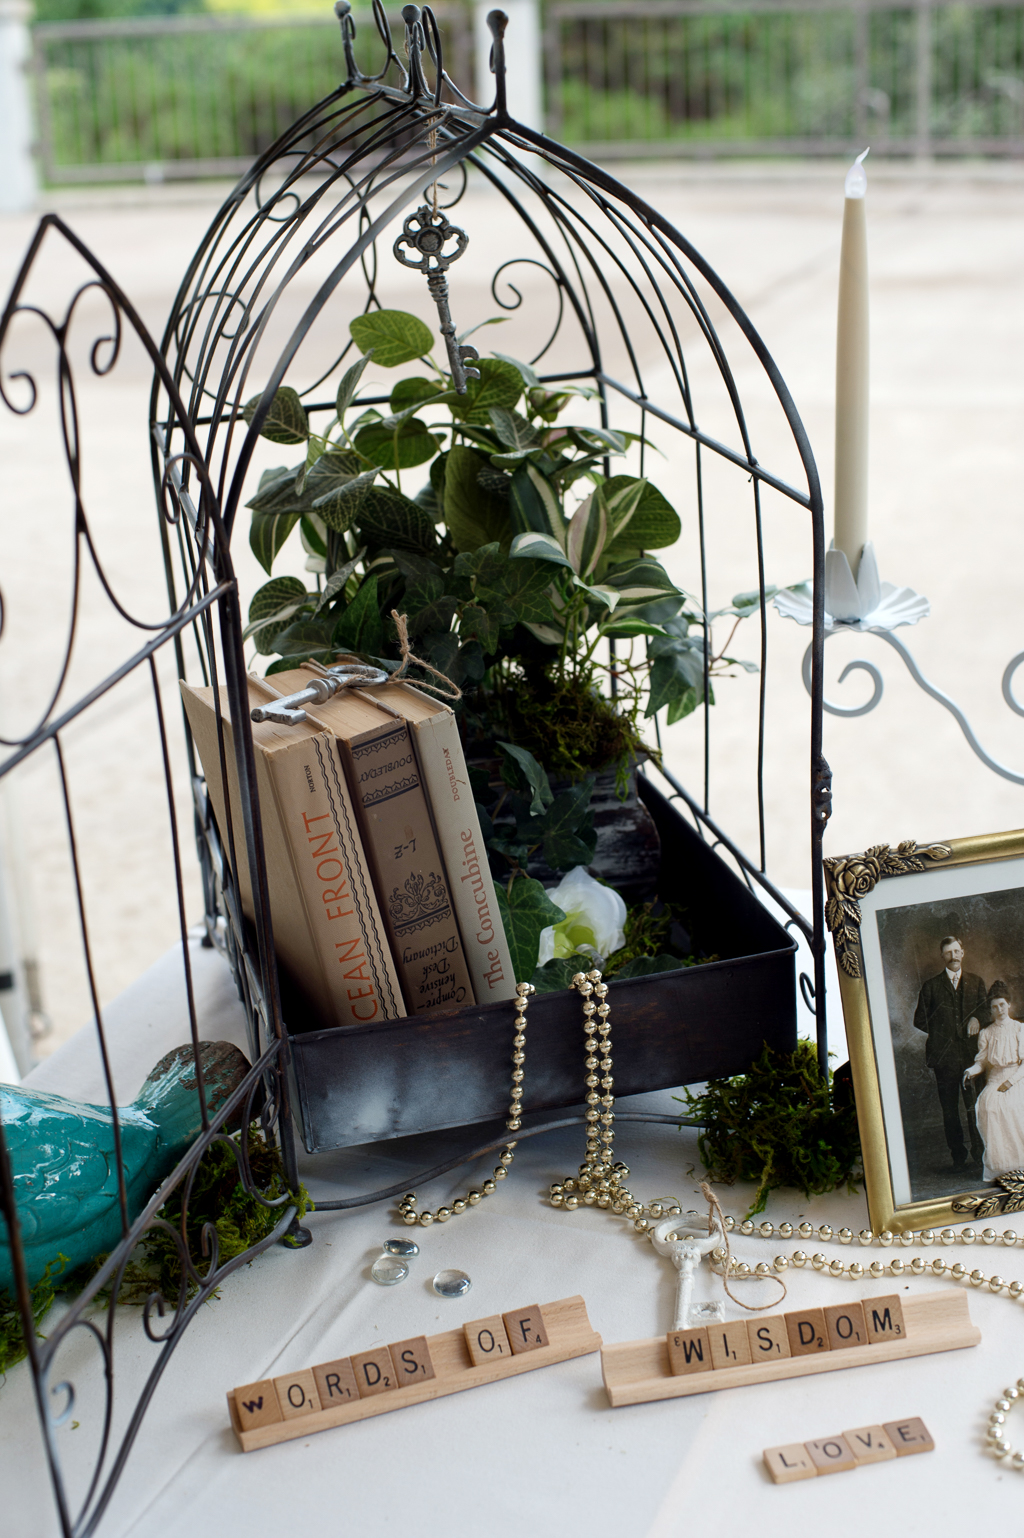 a birdcage filled with books and flowers decorates the wedding reception